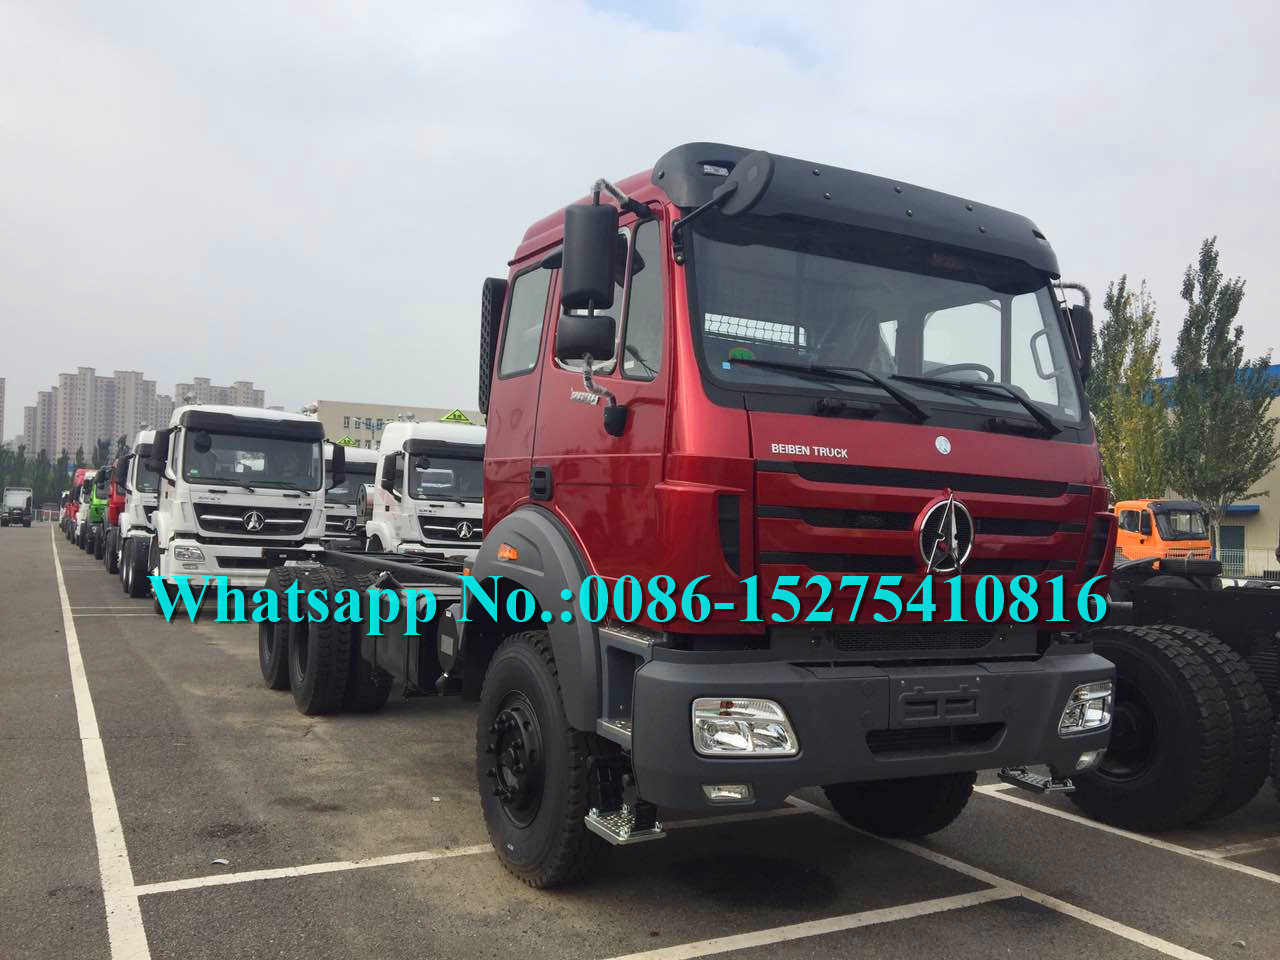 Red Military Use 6x6 Cargo Truck / Off Road Cargo Truck Adopt Benz Technology